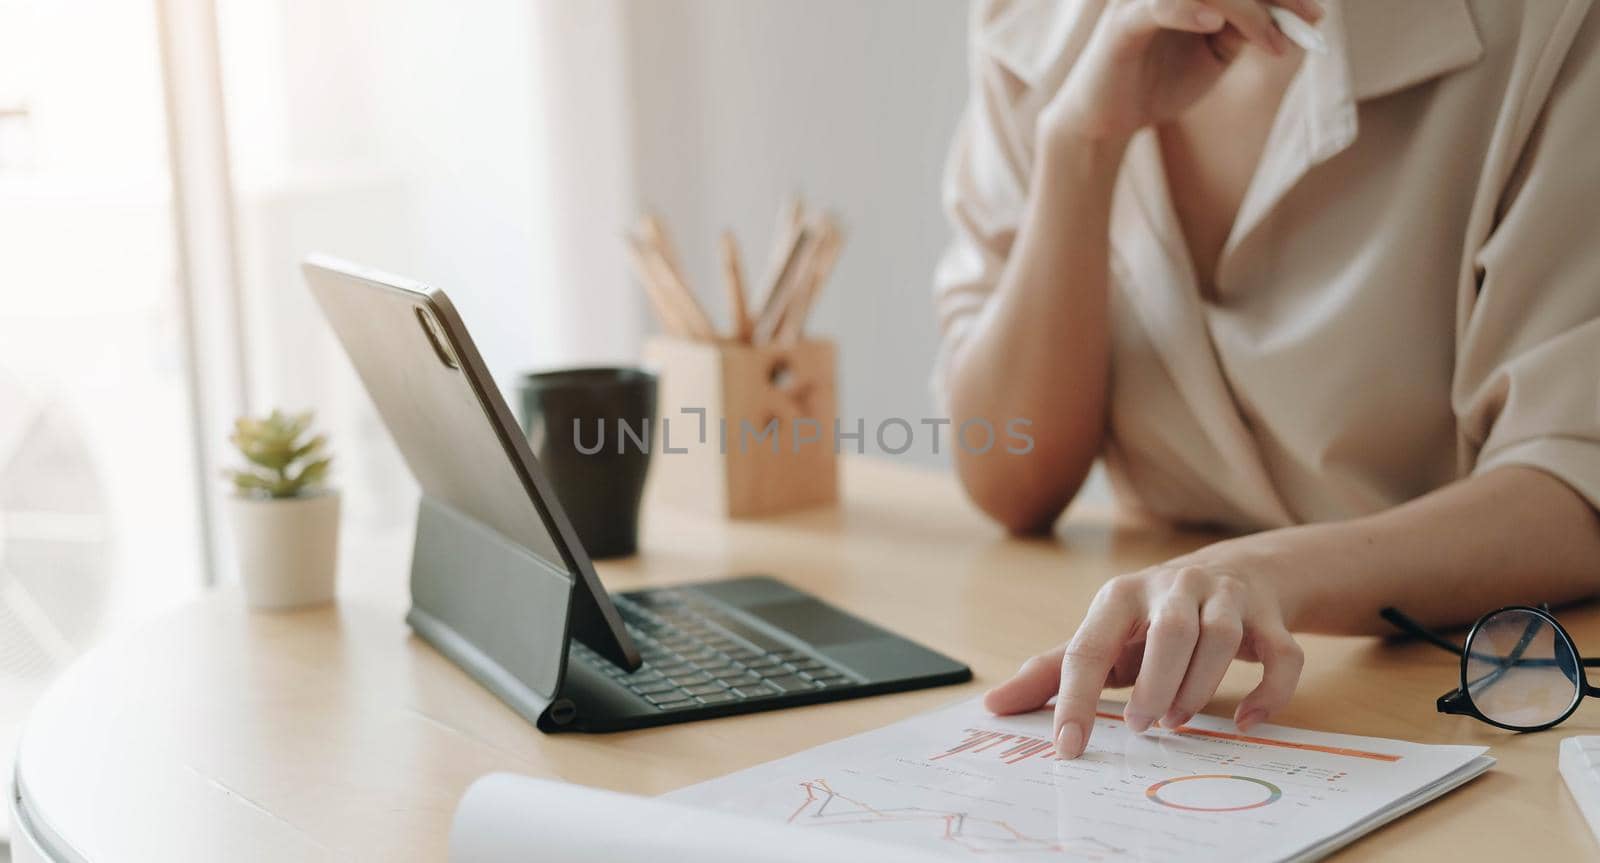 Businesswoman investment consultant analyzing company annual financial report balance sheet statement working with calculator and financial documents. Concept picture of business, market, office, tax.
